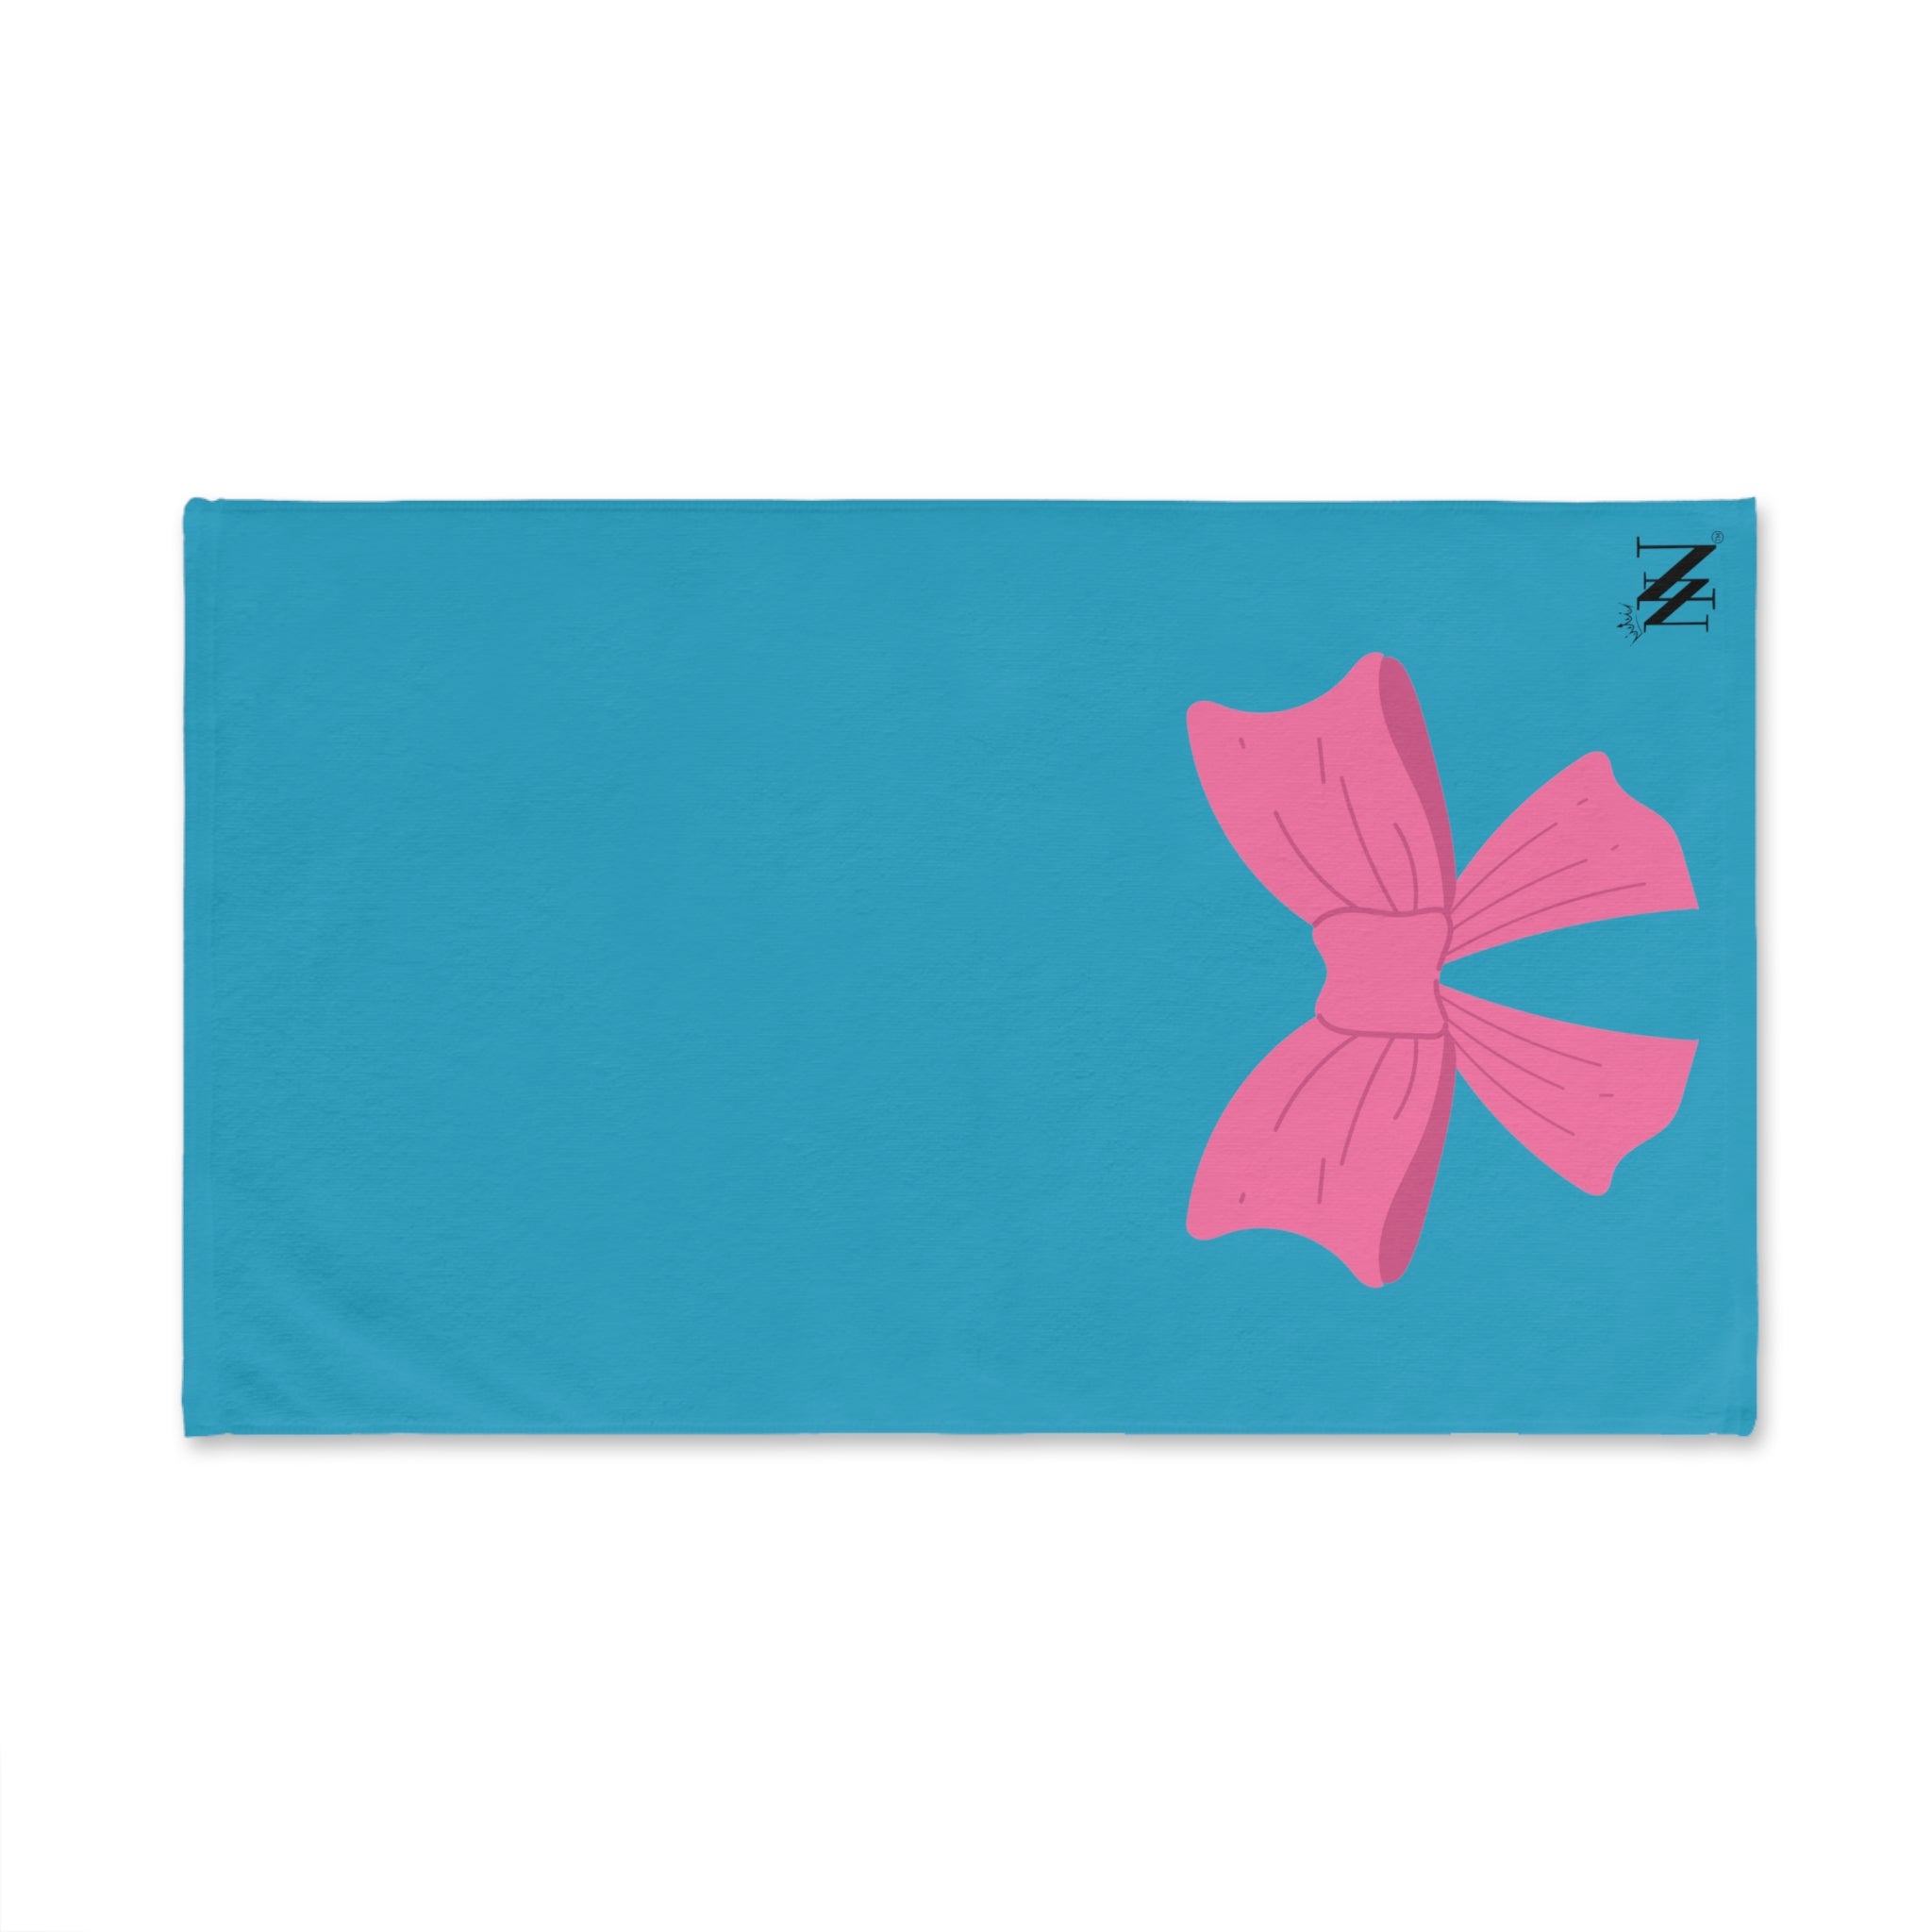 Bow Ribbon Pink Teal | Novelty Gifts for Boyfriend, Funny Towel Romantic Gift for Wedding Couple Fiance First Year Anniversary Valentines, Party Gag Gifts, Joke Humor Cloth for Husband Men BF NECTAR NAPKINS